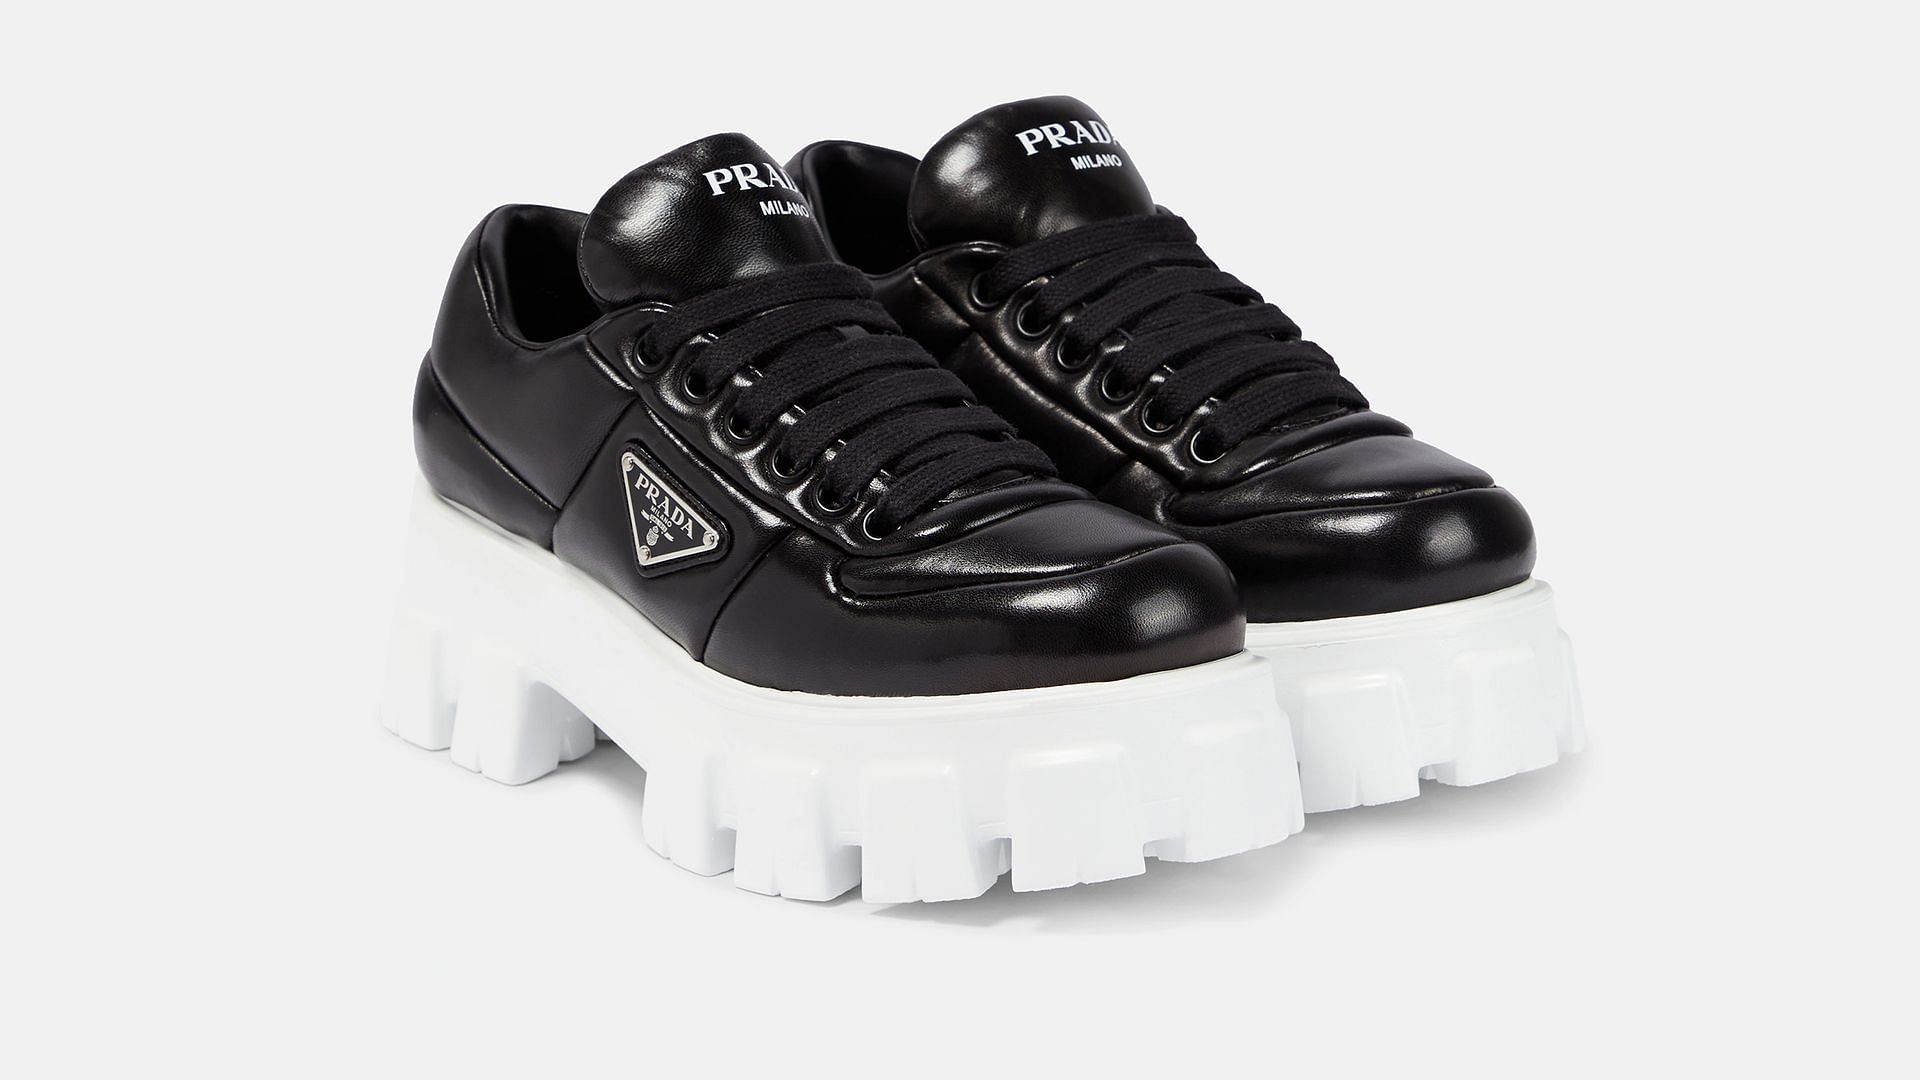 The Soft Padded Nappa Leather Lace-up sneakers (Image via Stock X)